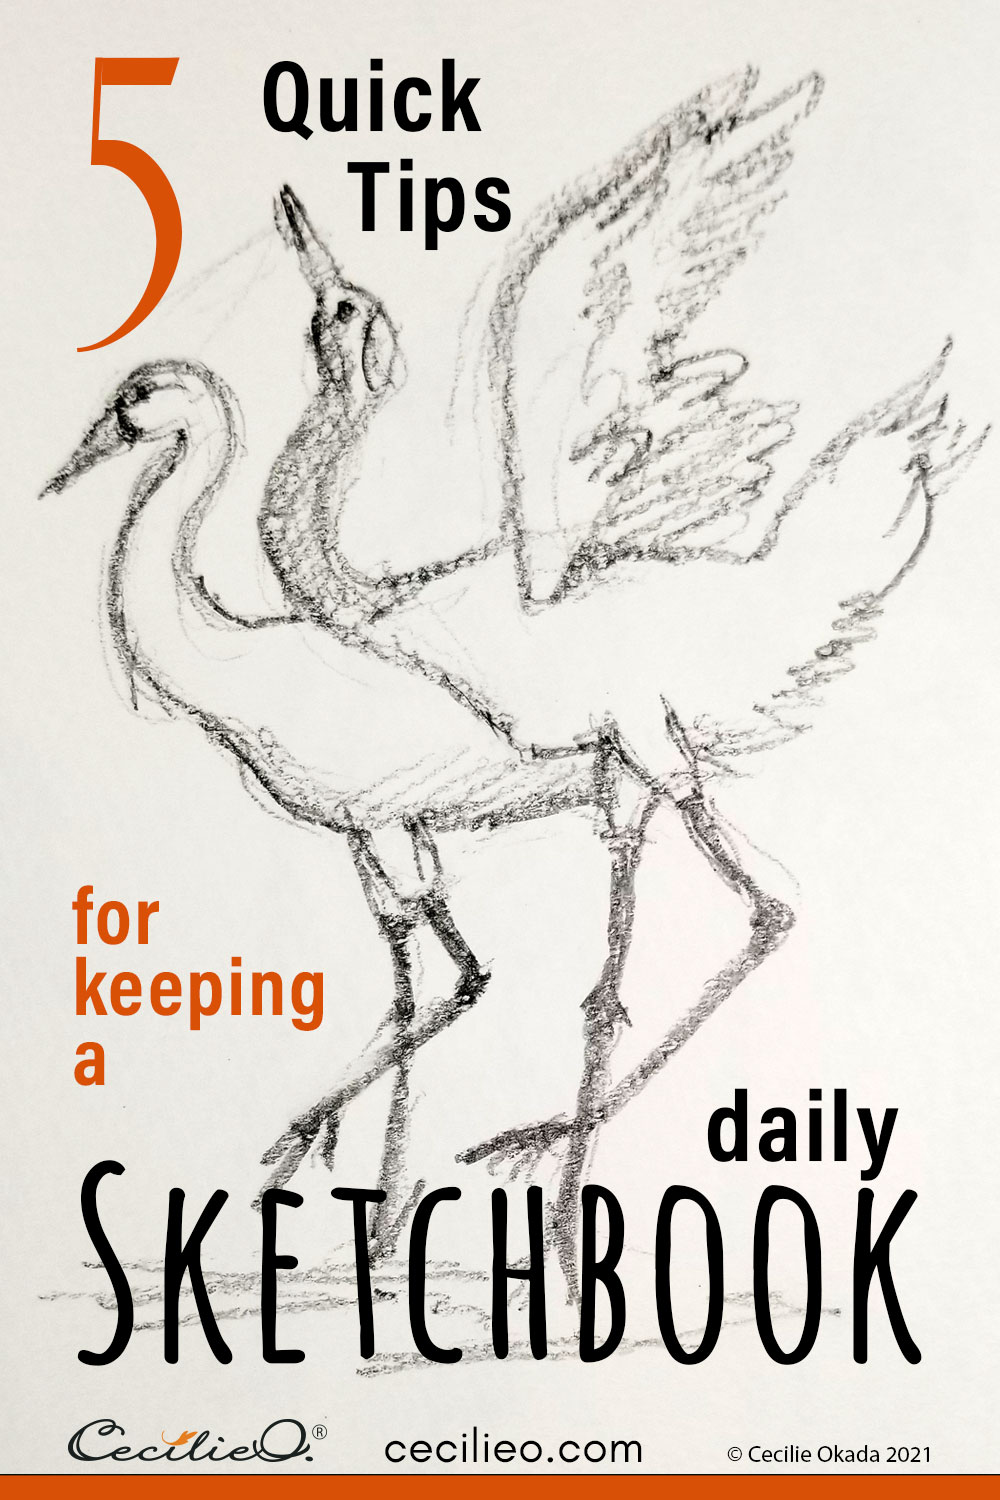 Inspiration for keeping a daily sketchbook to improve your artistic skills. Frequent sketching is key to becoming a good artist.